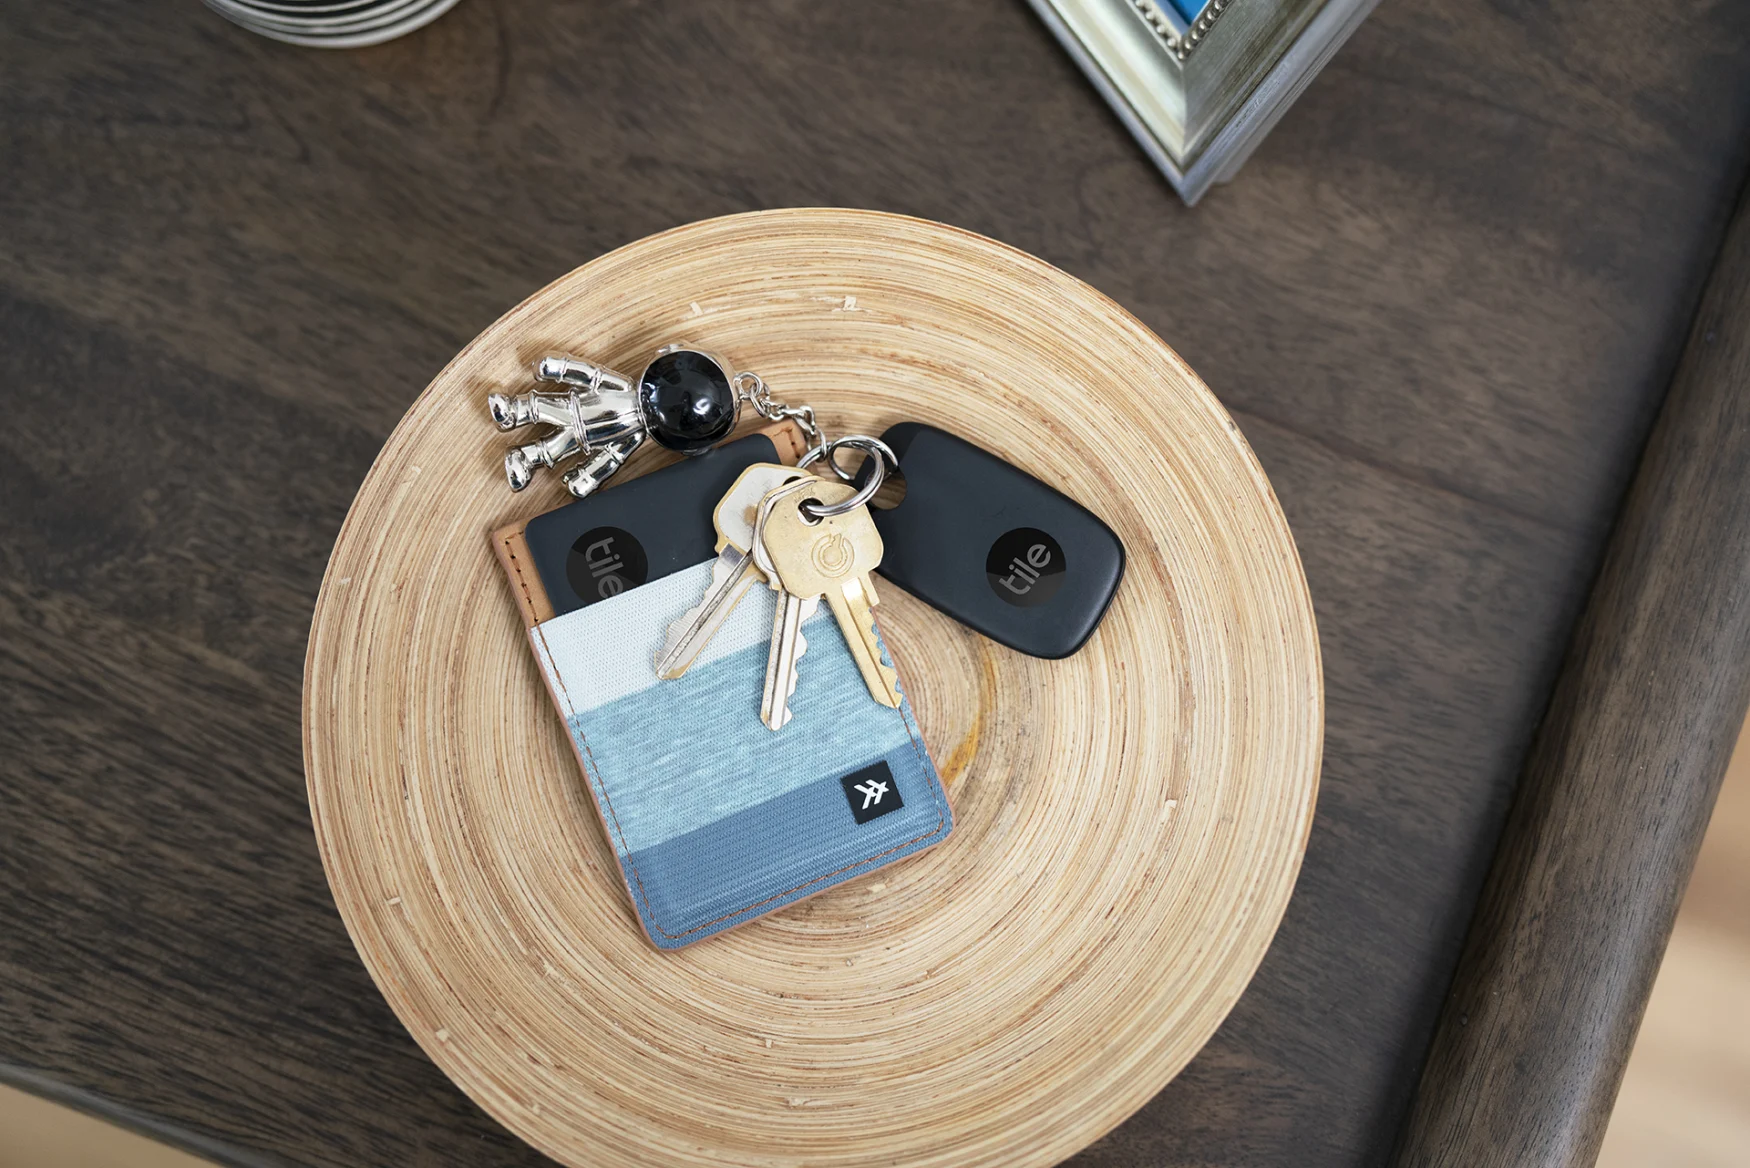 Tile Bluetooth trackers